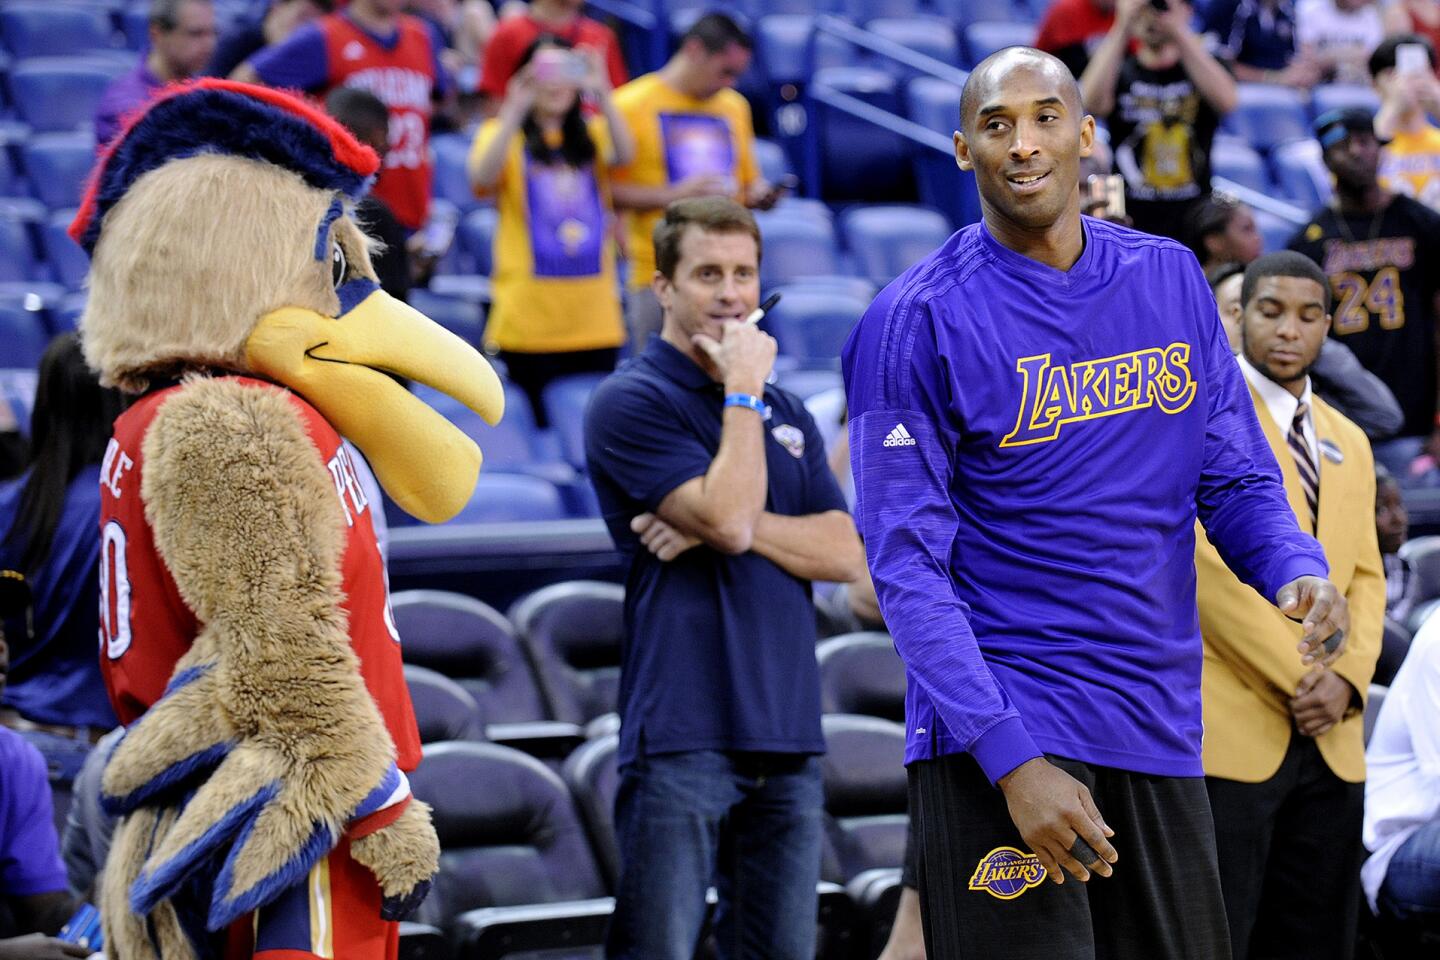 The New Orleans mascot pays a visit toKobe Bryant as he warms up for the game against the Pelicans.